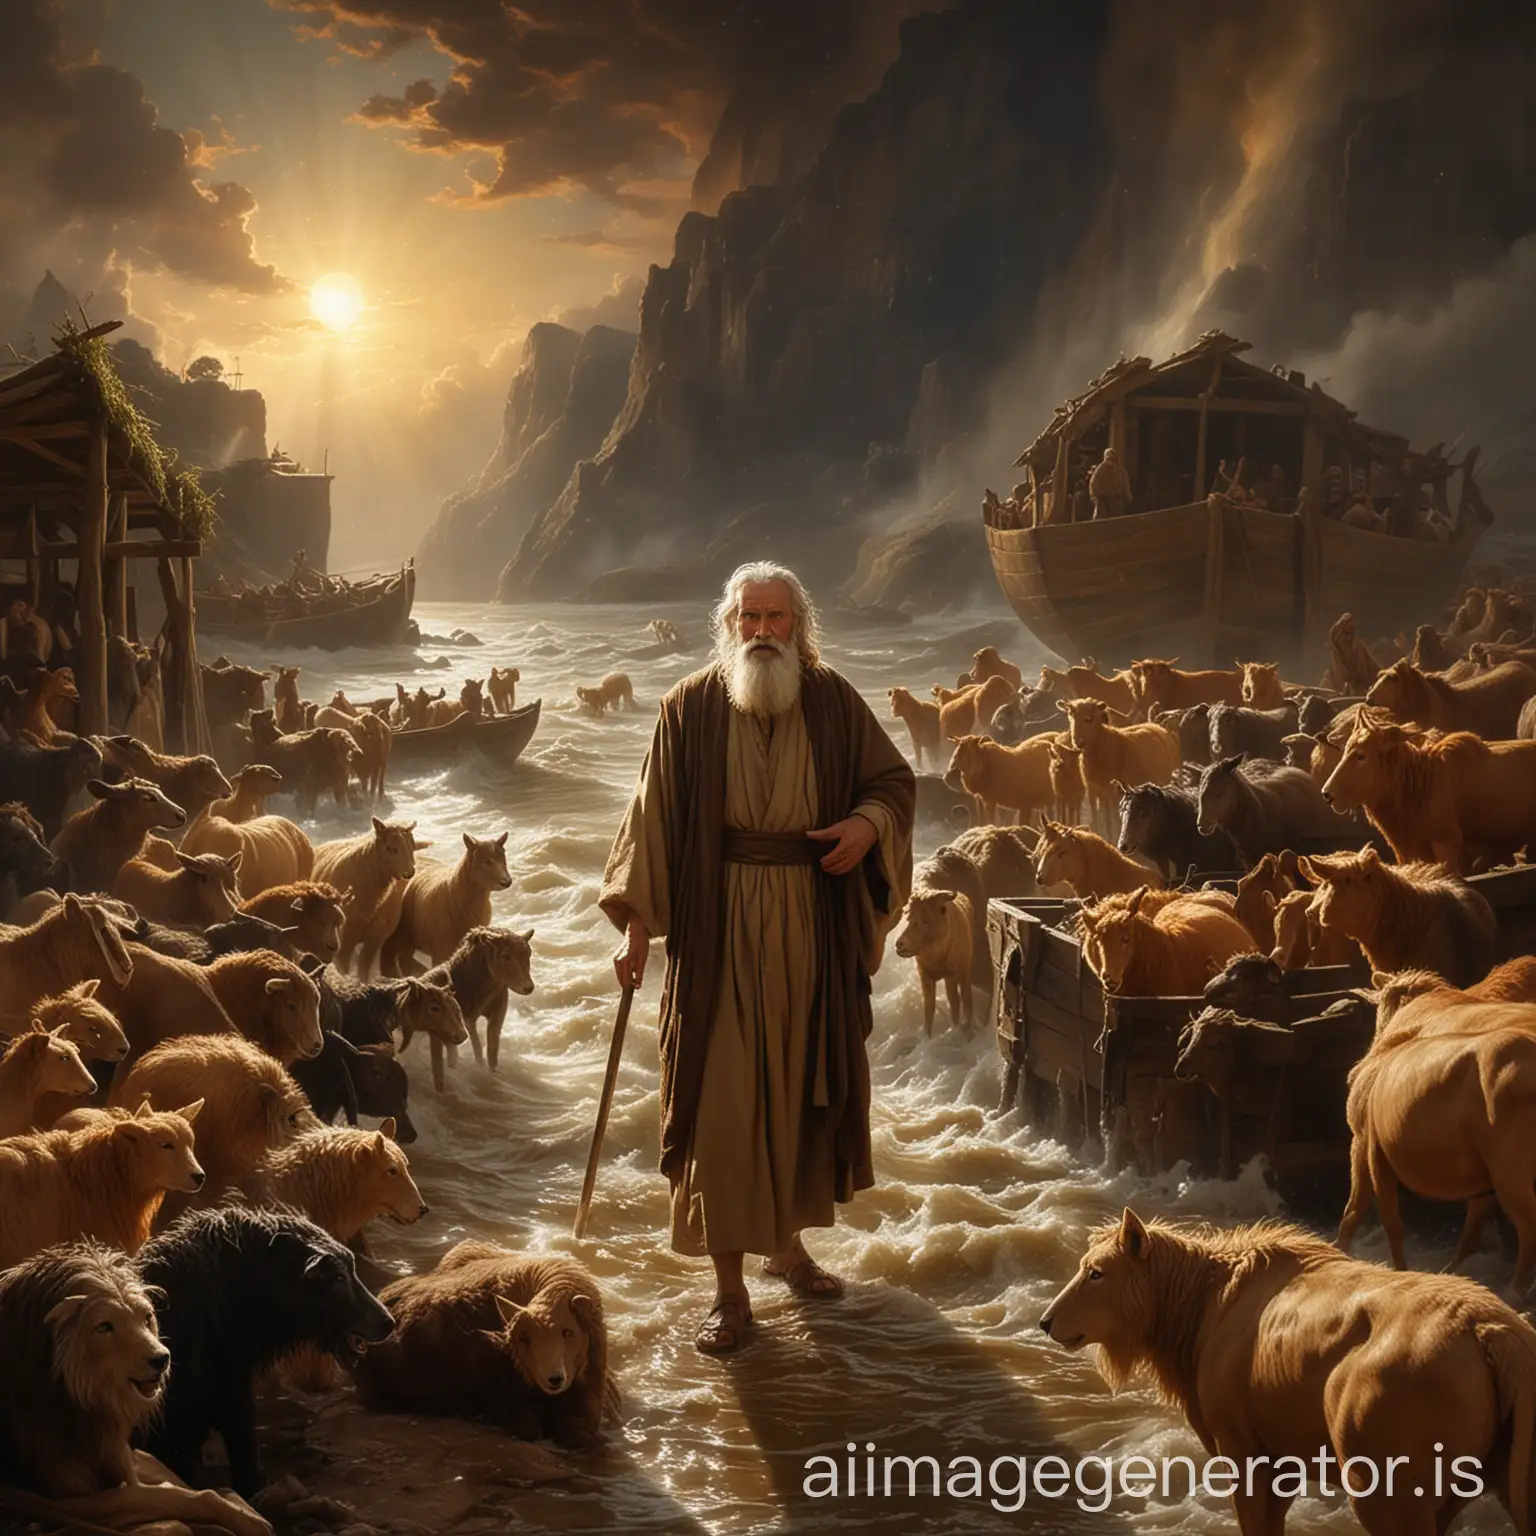 Create an oil painting that portrays the biblical moment before the flood of Noah letting the animals board the ark in pairs. The scene unfolds in a dramatic and awe-inspiring landscape. Noah, a venerable figure with a flowing beard and robes, stands prominently at the center, his face glowing with a radiant light indicating his divine encounter. Noah holds firmly a wooden staff in his hands. The color palette is rich with earthy tones of the mountain and vibrant lights to highlight the supernatural aspect of this event.